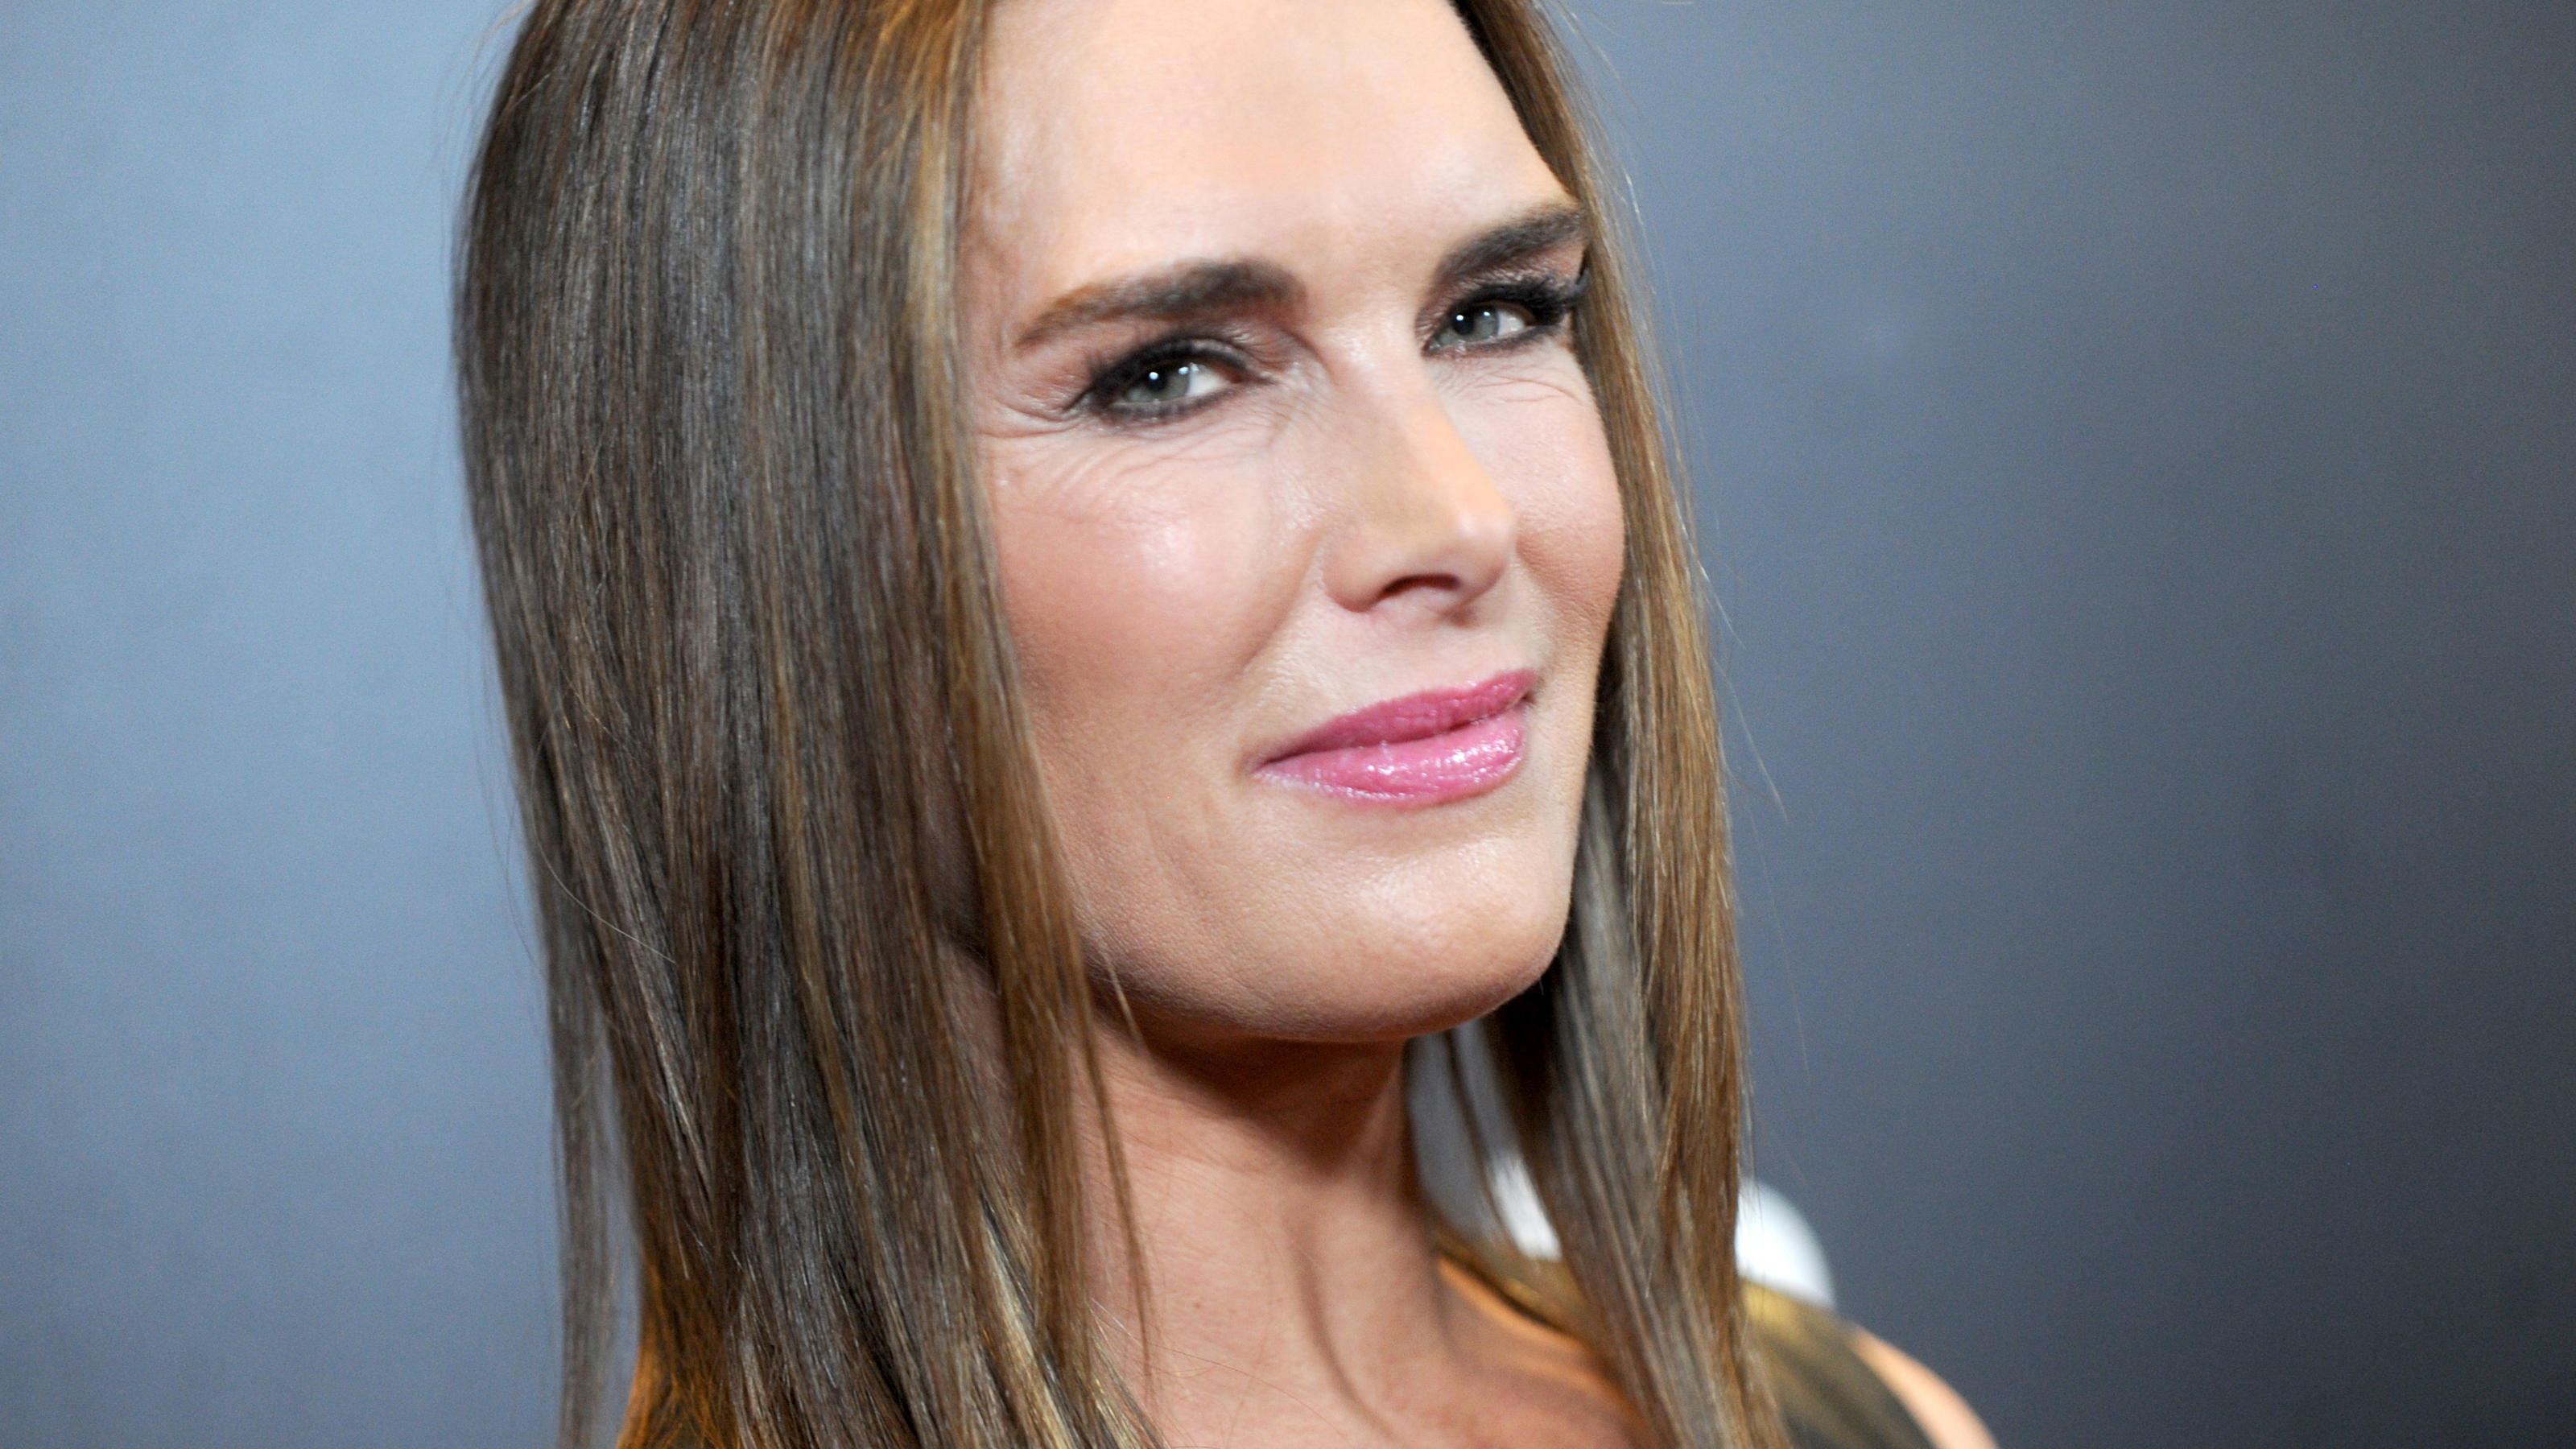 Brooke Shields attends the 'Woman In Gold' New York premiere at The Museum of Modern Art in in New York on March 30, 2015. Photo by Dennis Van Tine/ABACAUSA.COM